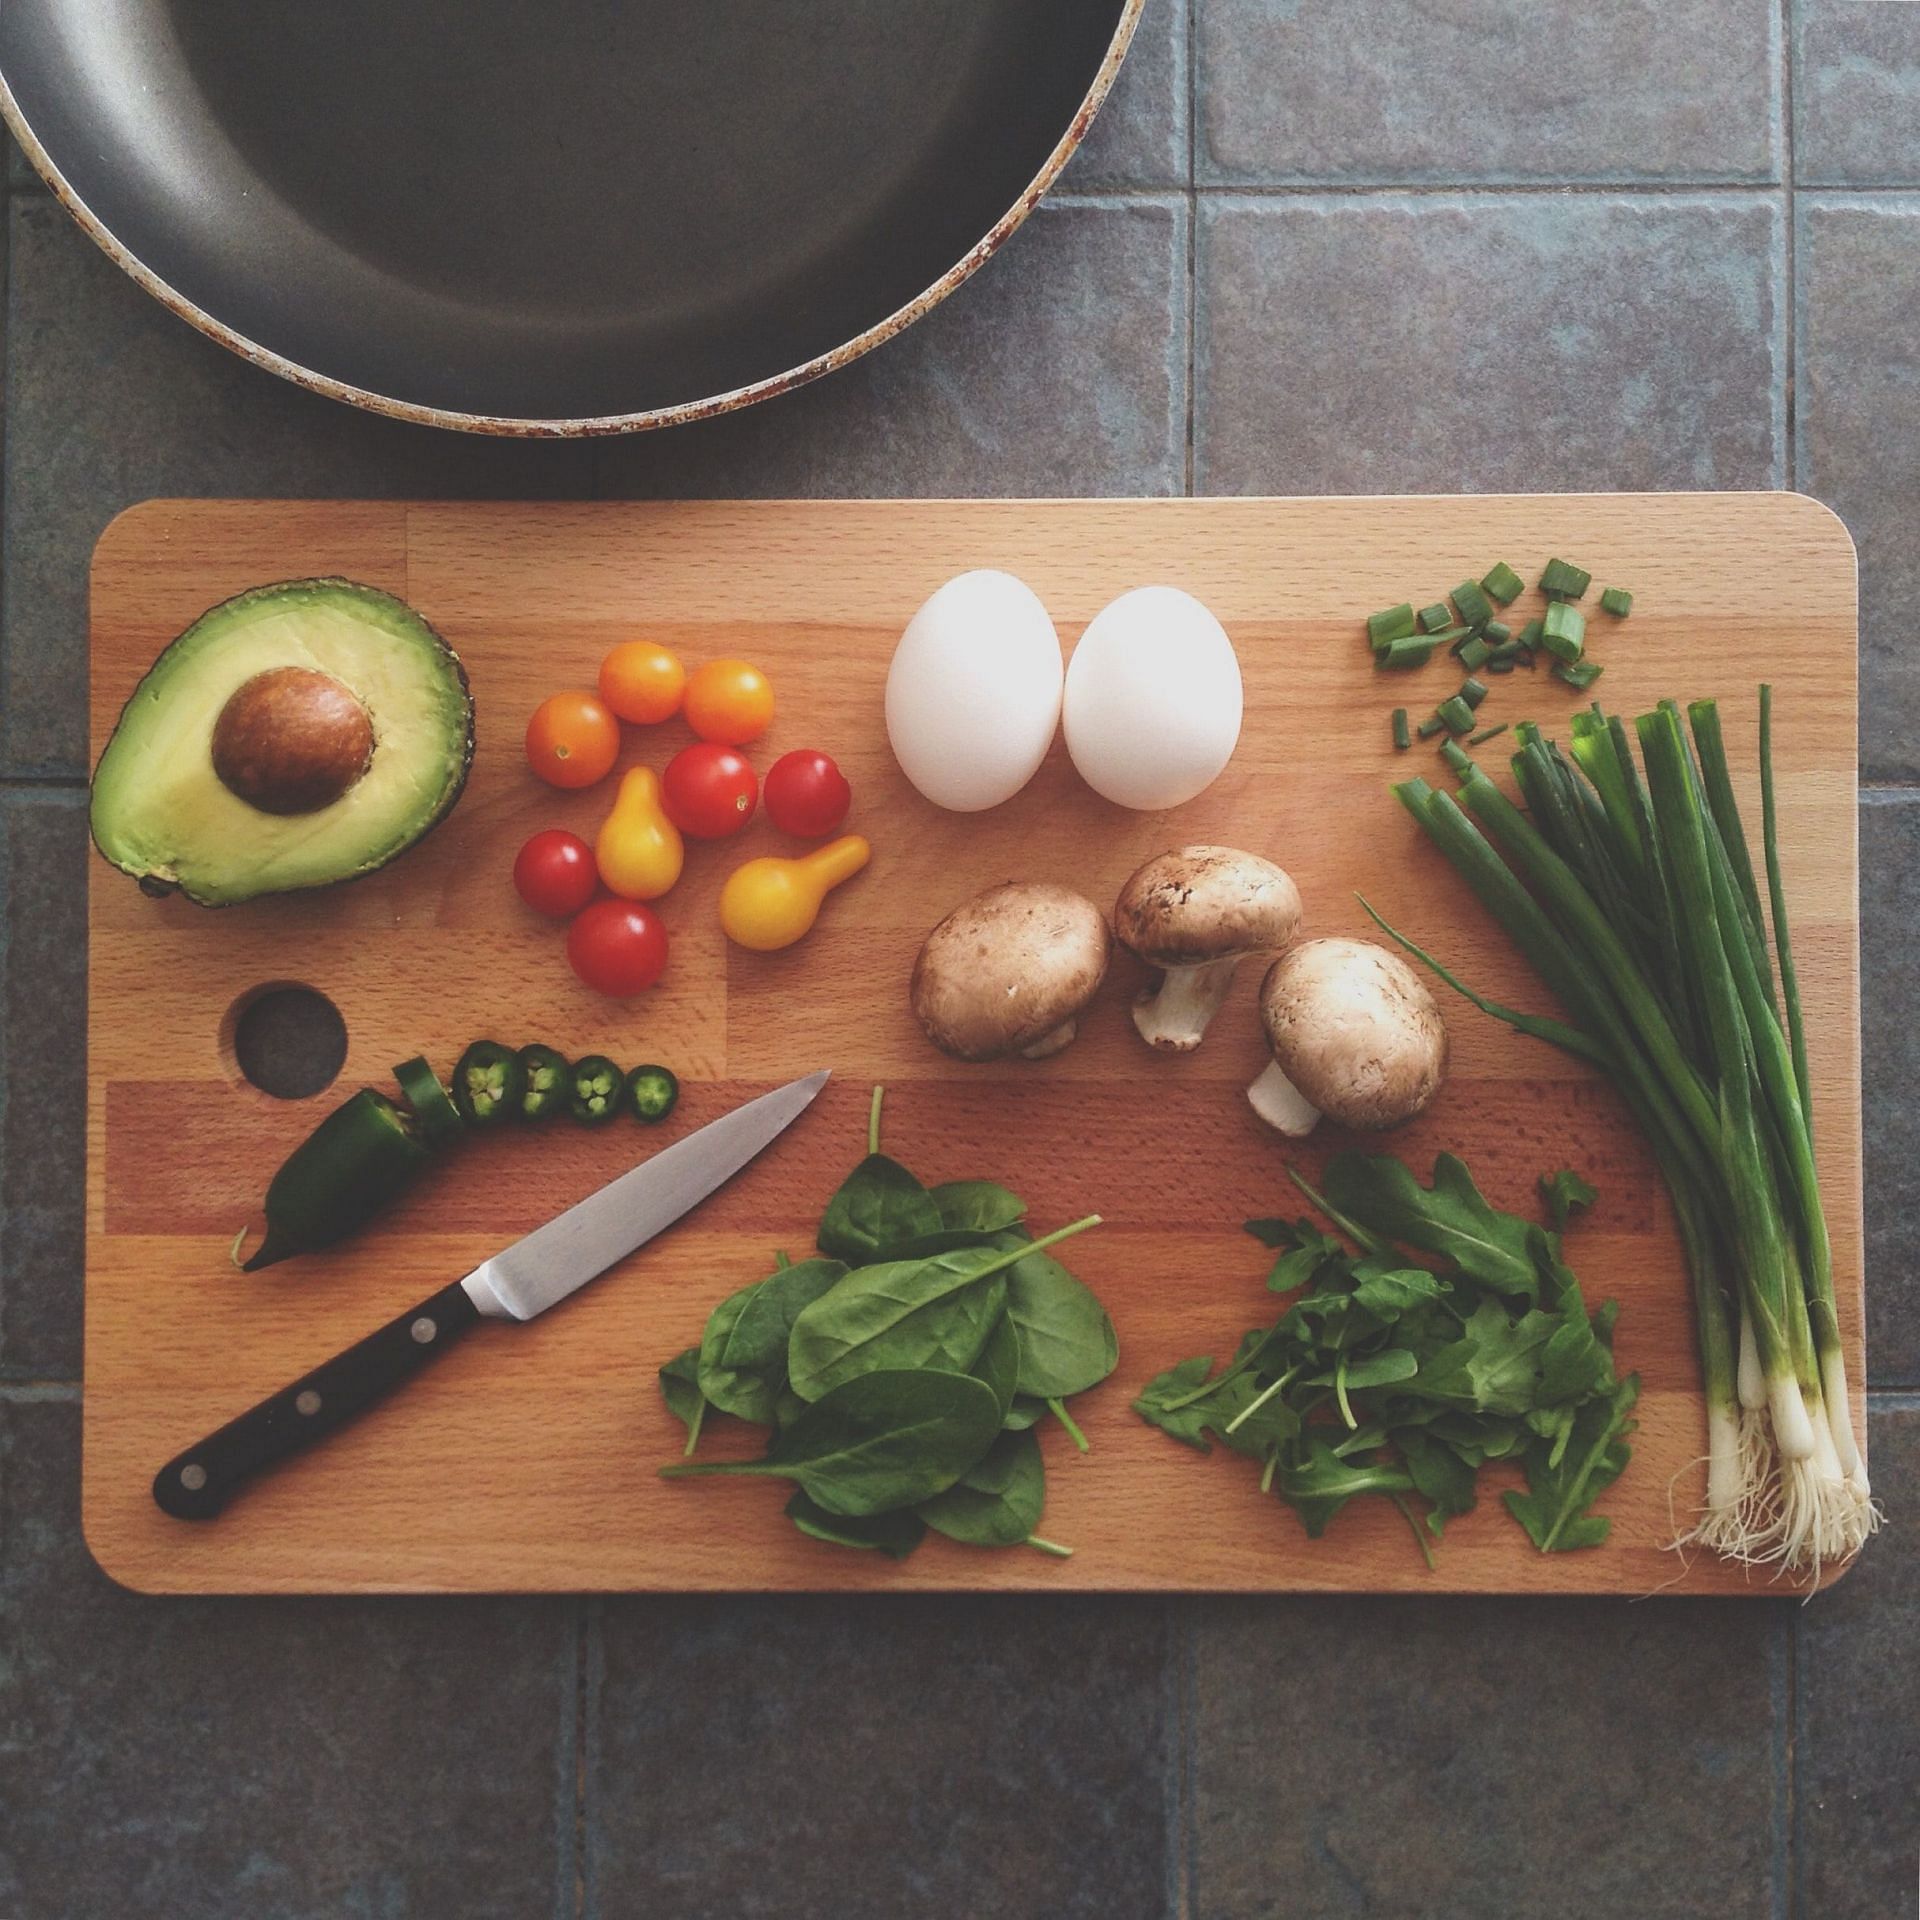 A balanced and varied diet can reduce risk of cancer. (Image via Unsplash/Katie Smith)